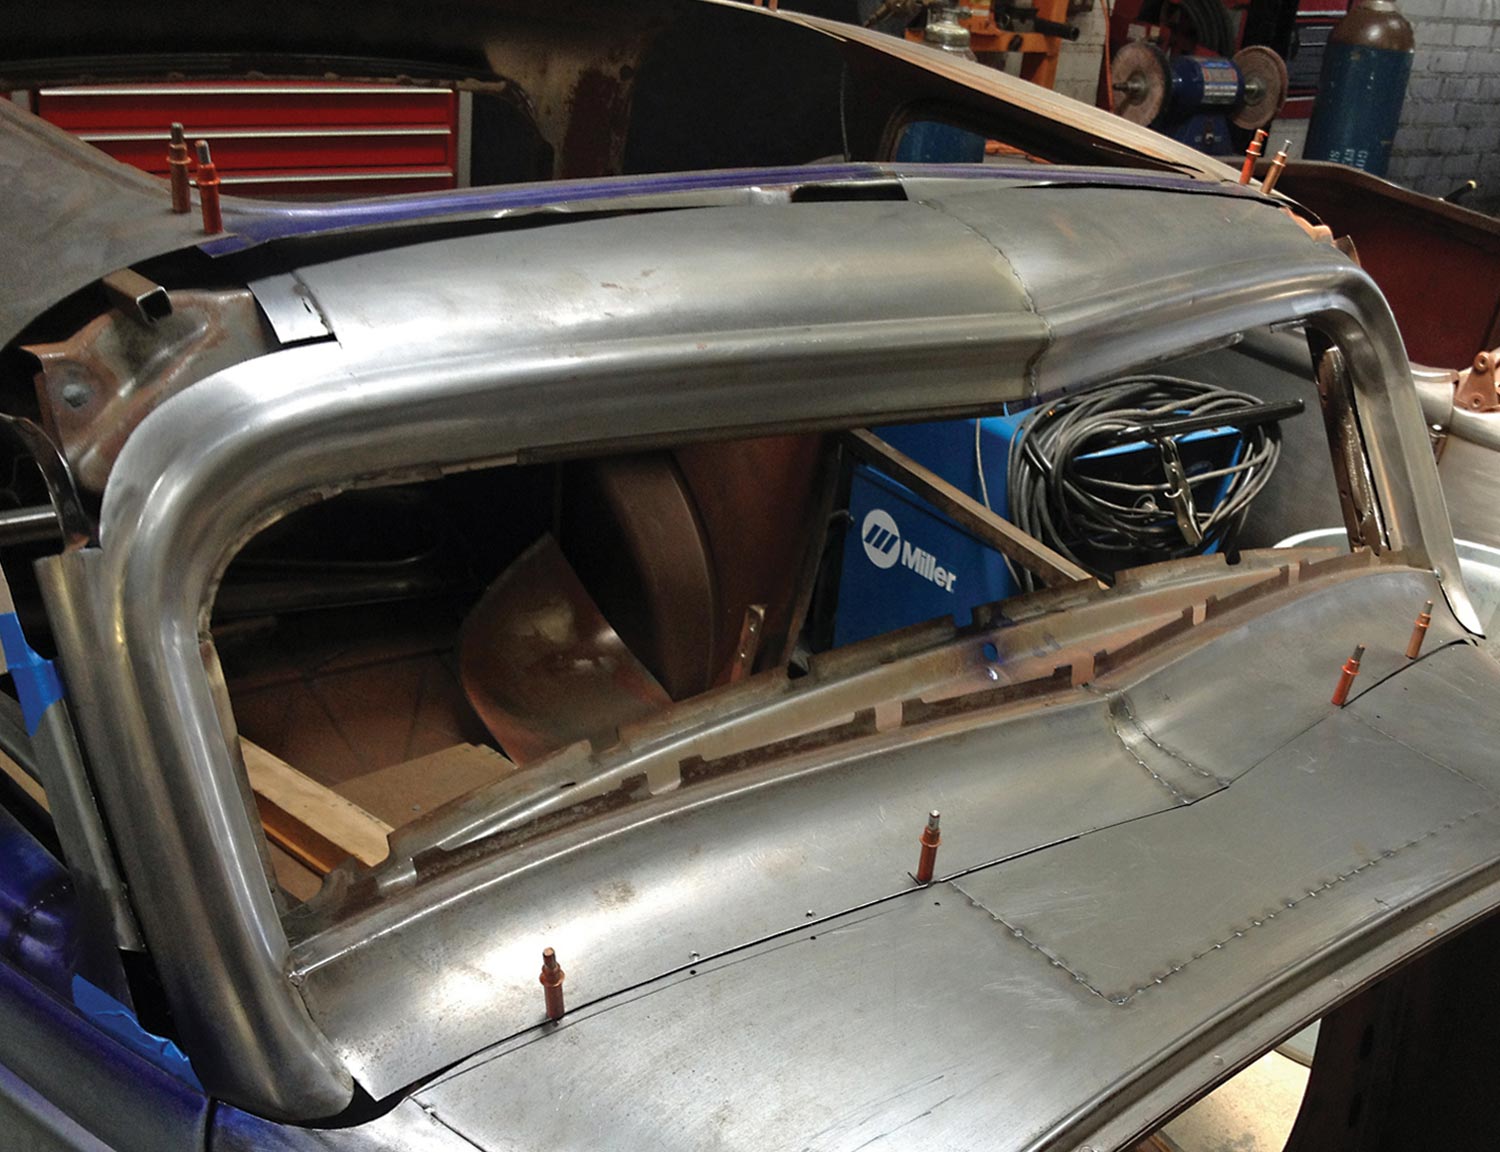 the roof panel pieces being painstakingly fitted together using Clecos